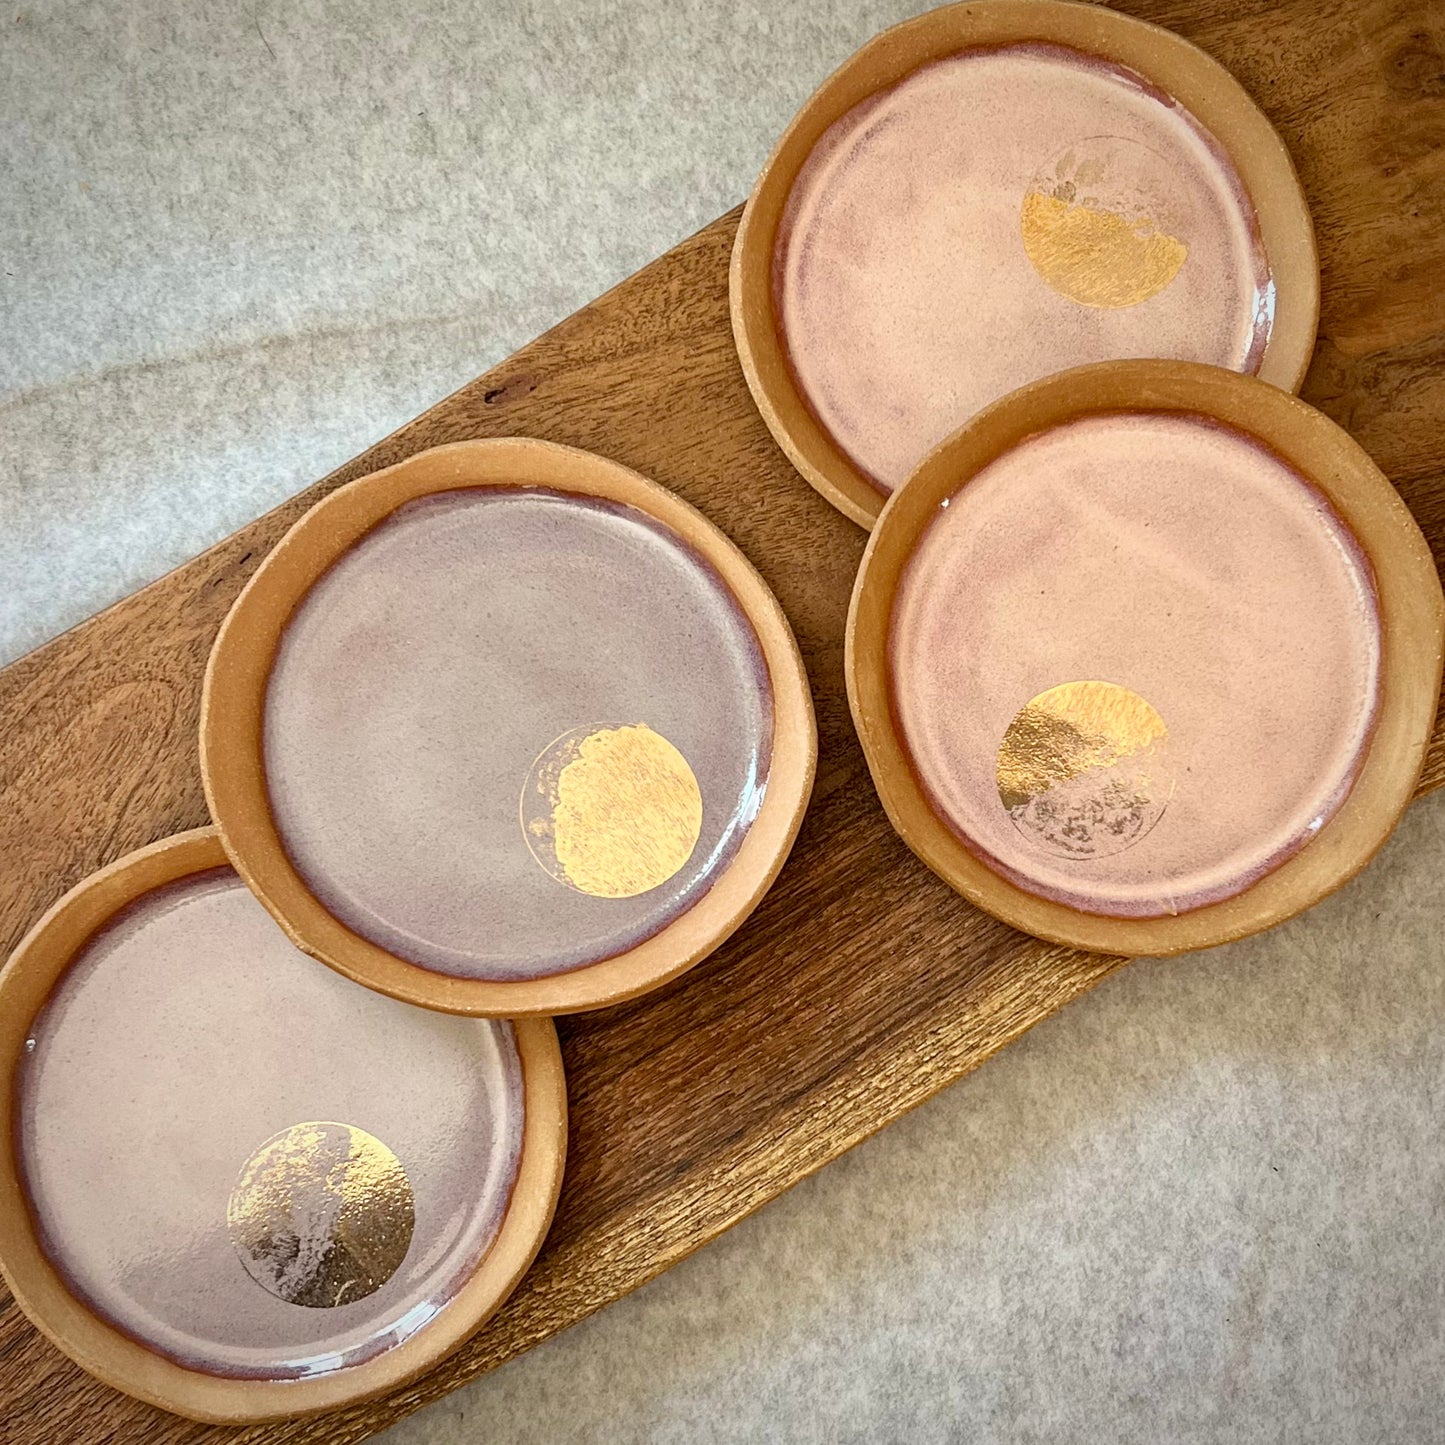 22k gold moon dishes